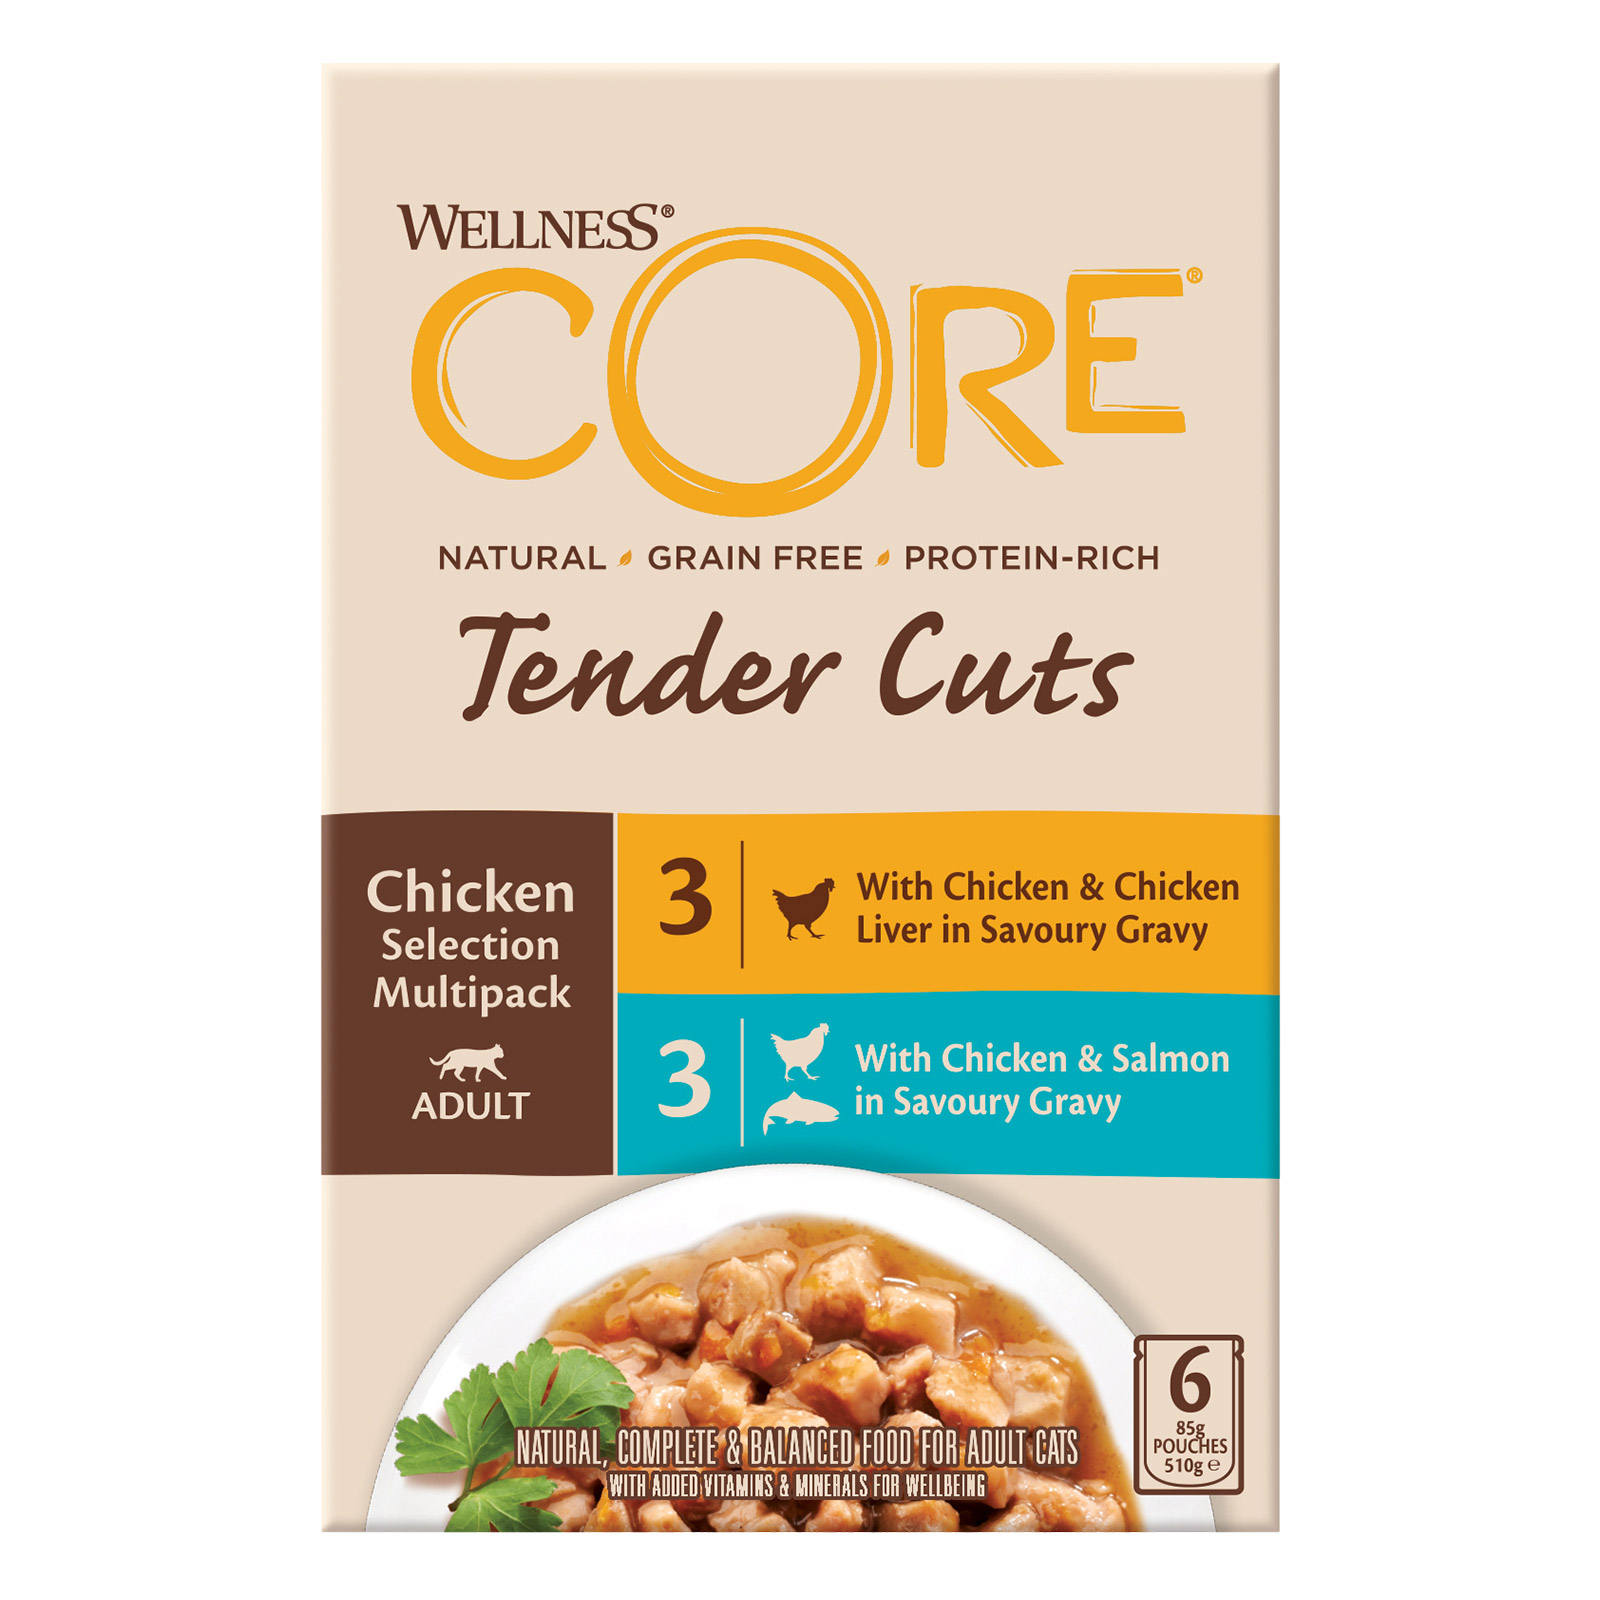 Wellness CORE Tender Cuts Chicken Selection Multipack for Food